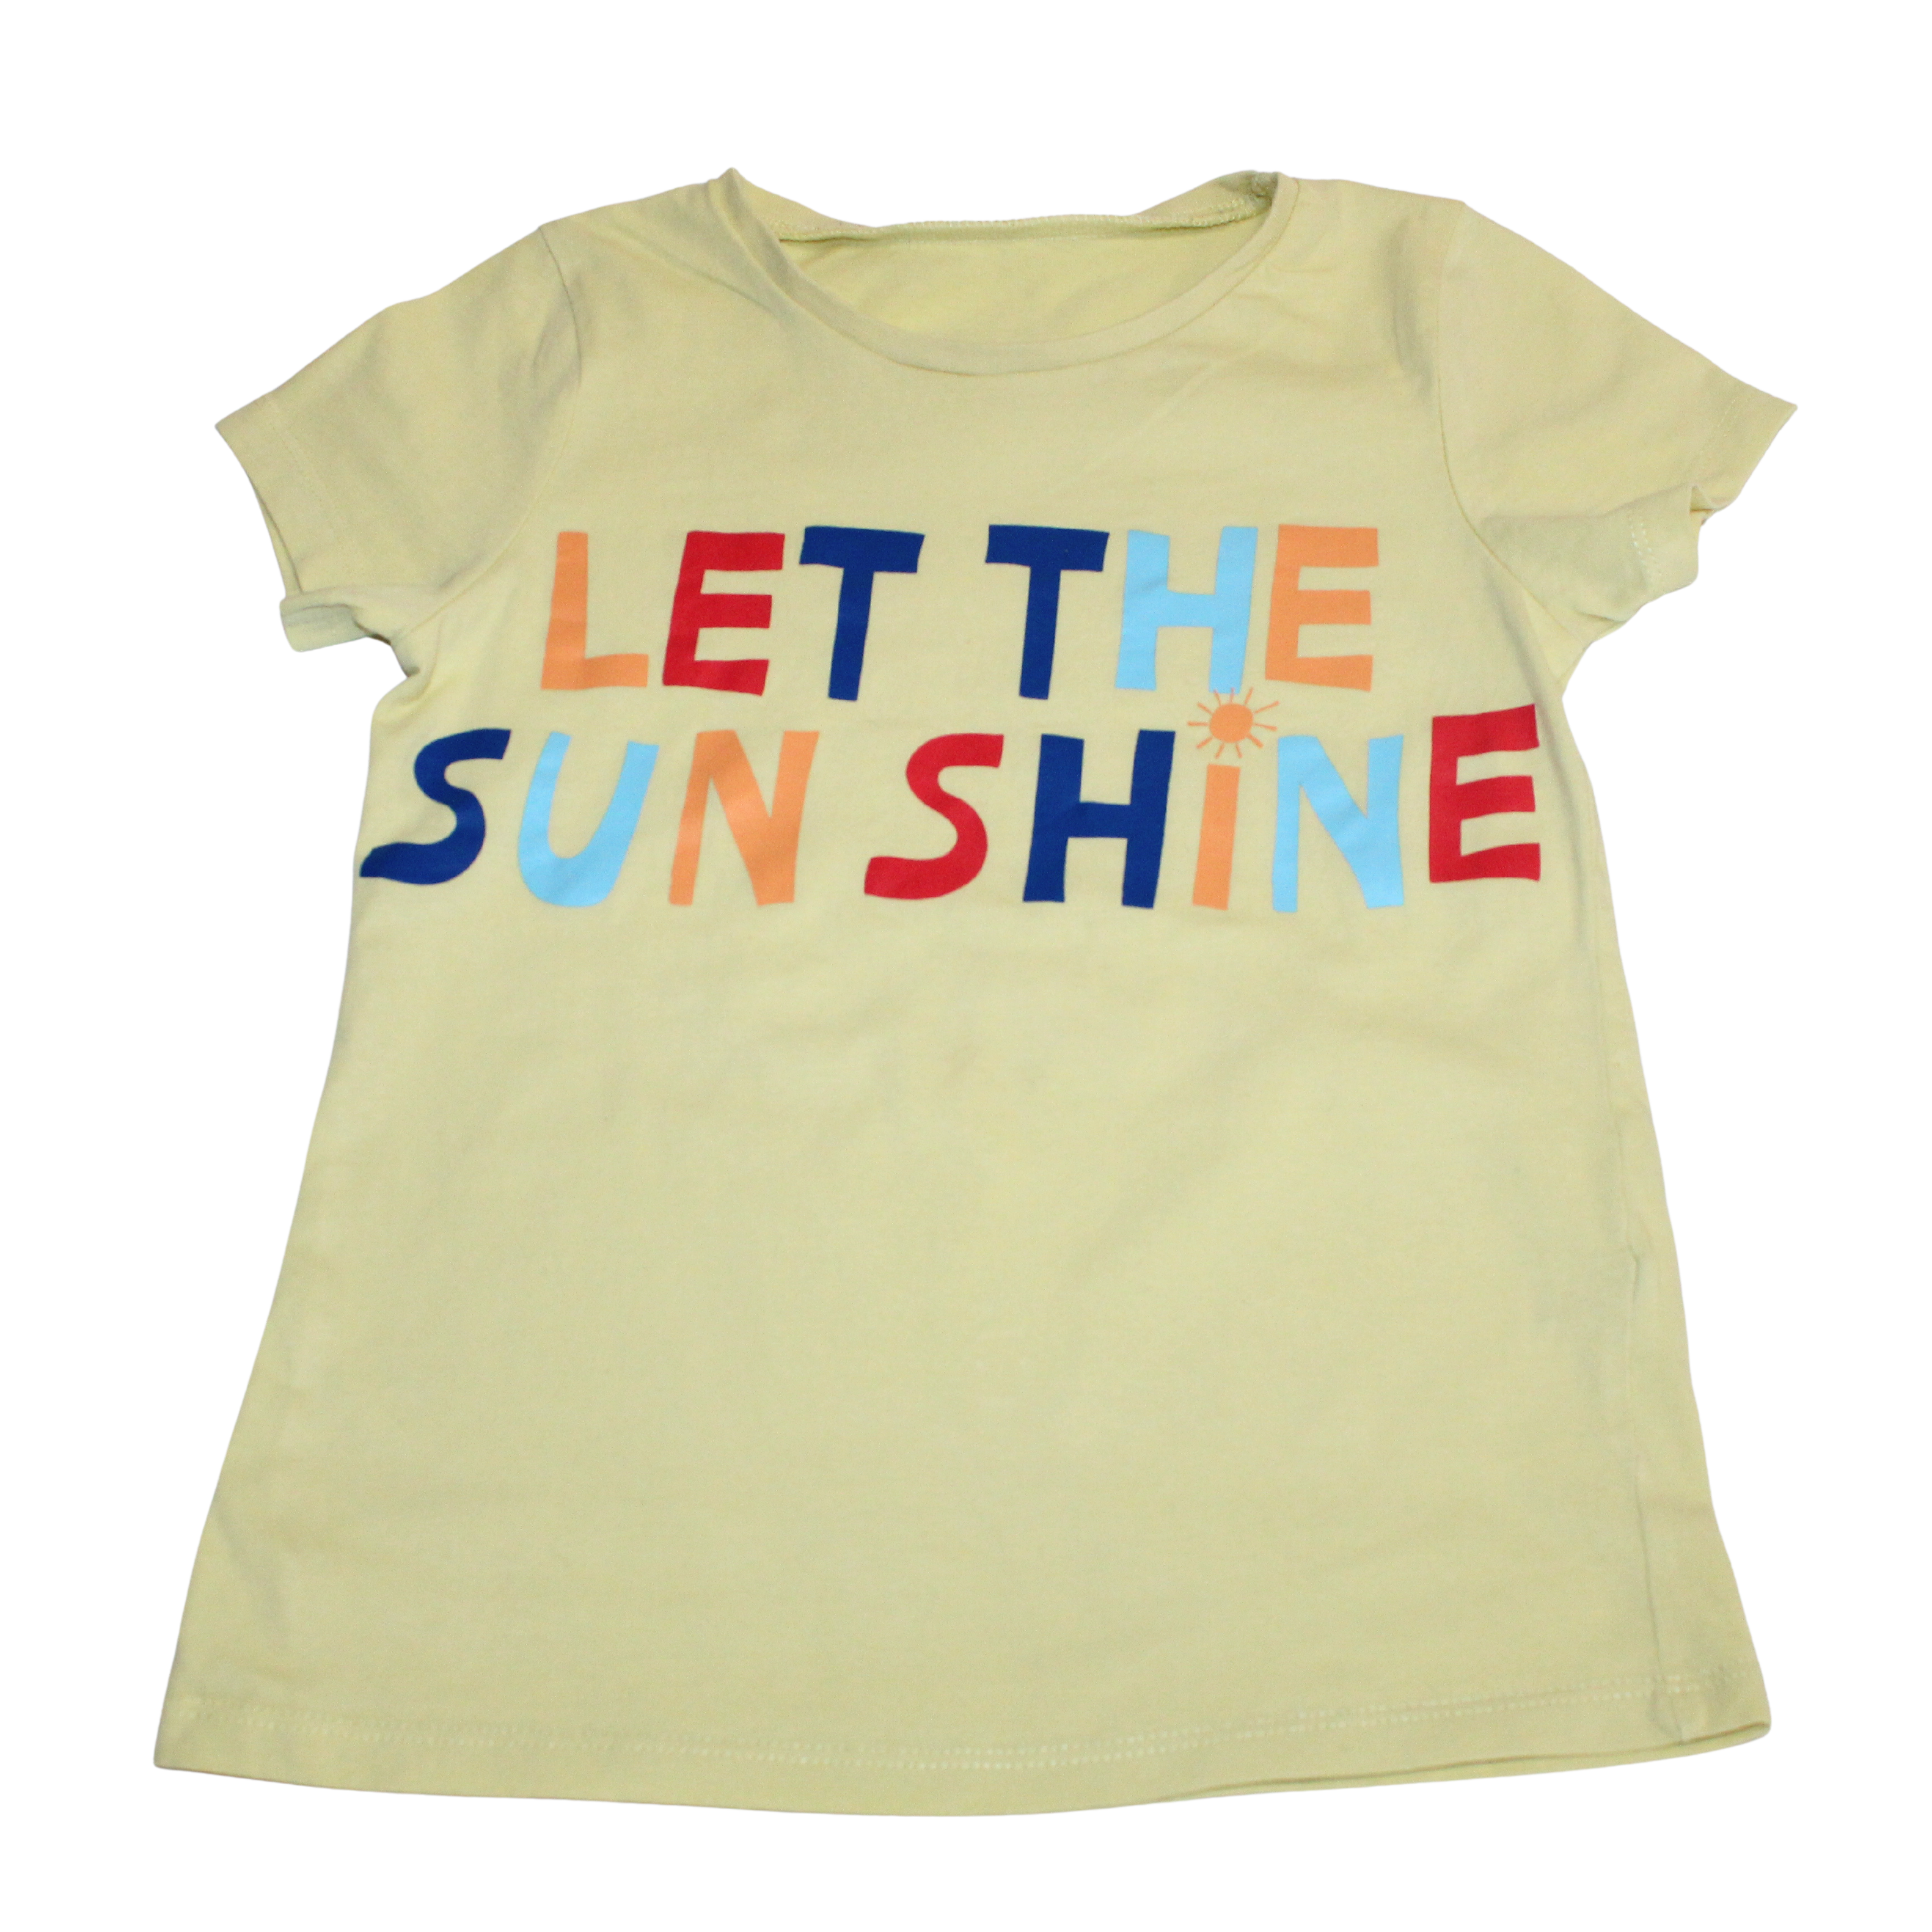 Let the Sunshine Tee